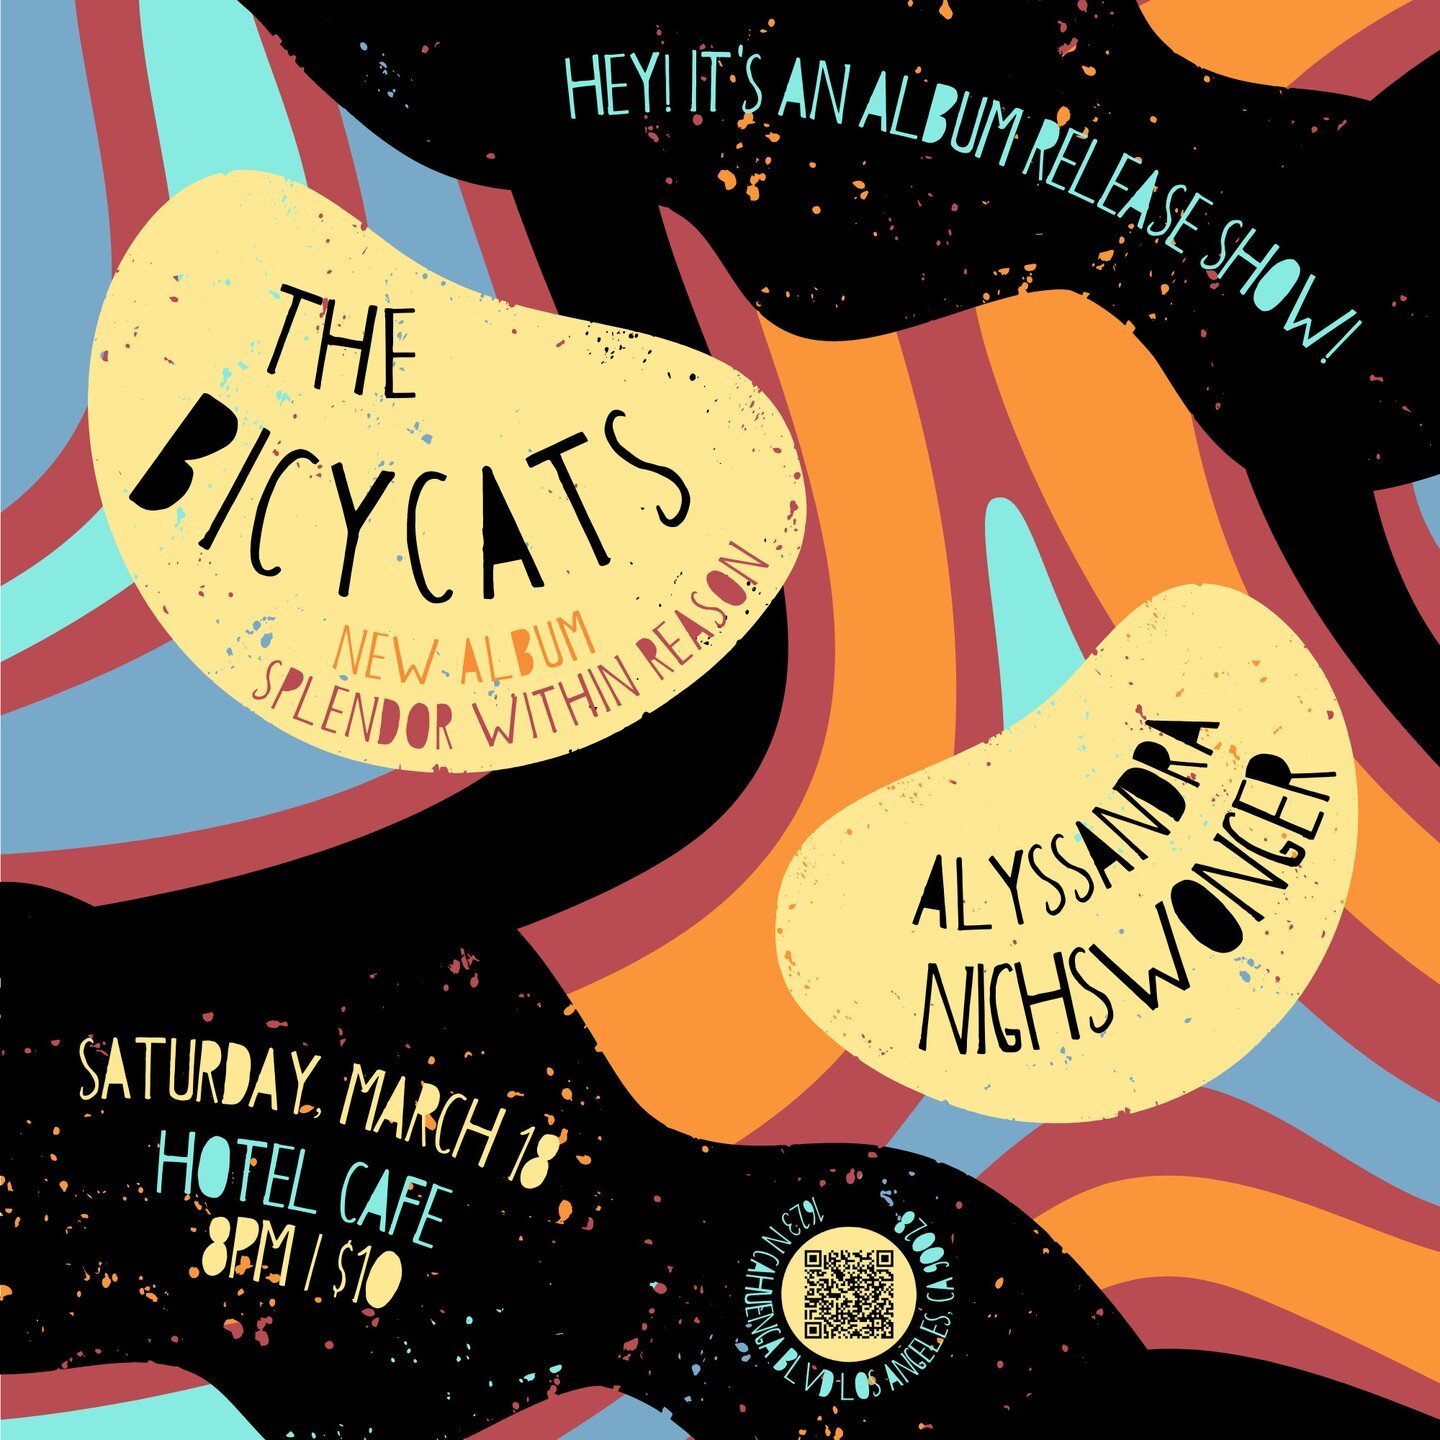 It's a record release show, people!

Saturday, March 18th @thehotelcafe 

To celebrate the new album, The Bicycats are assembling the full-band might of @rythojo , @bheveronsmith , @mollydworsky , @mdewa , and @onehighfive for a show at @thehotelcafe